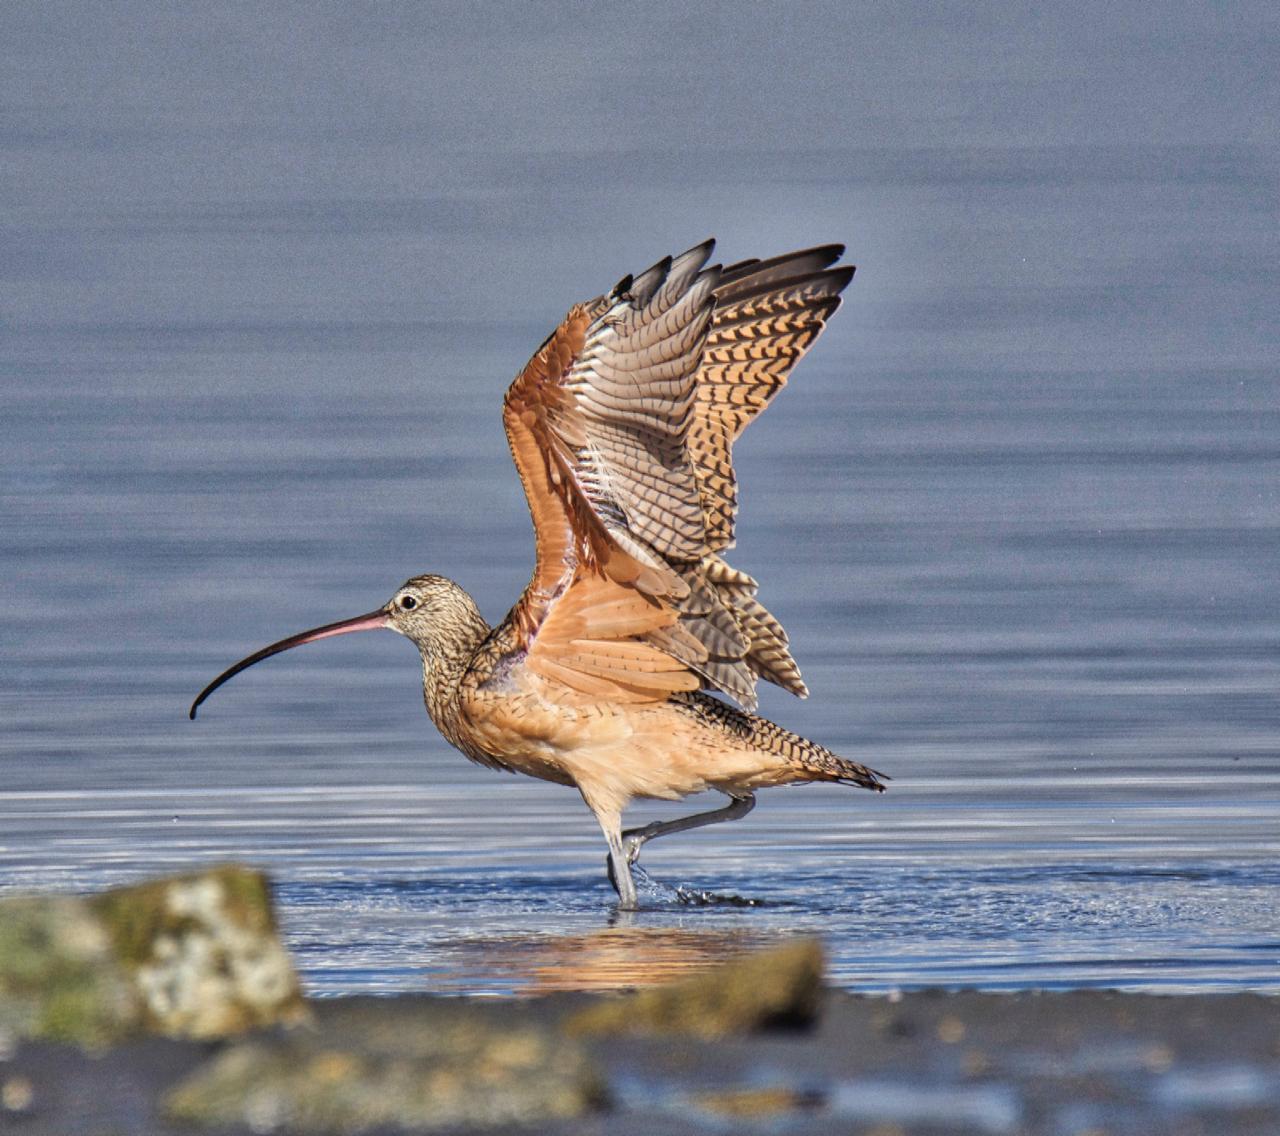 Long-billed Curlew Photo by Brian Avent